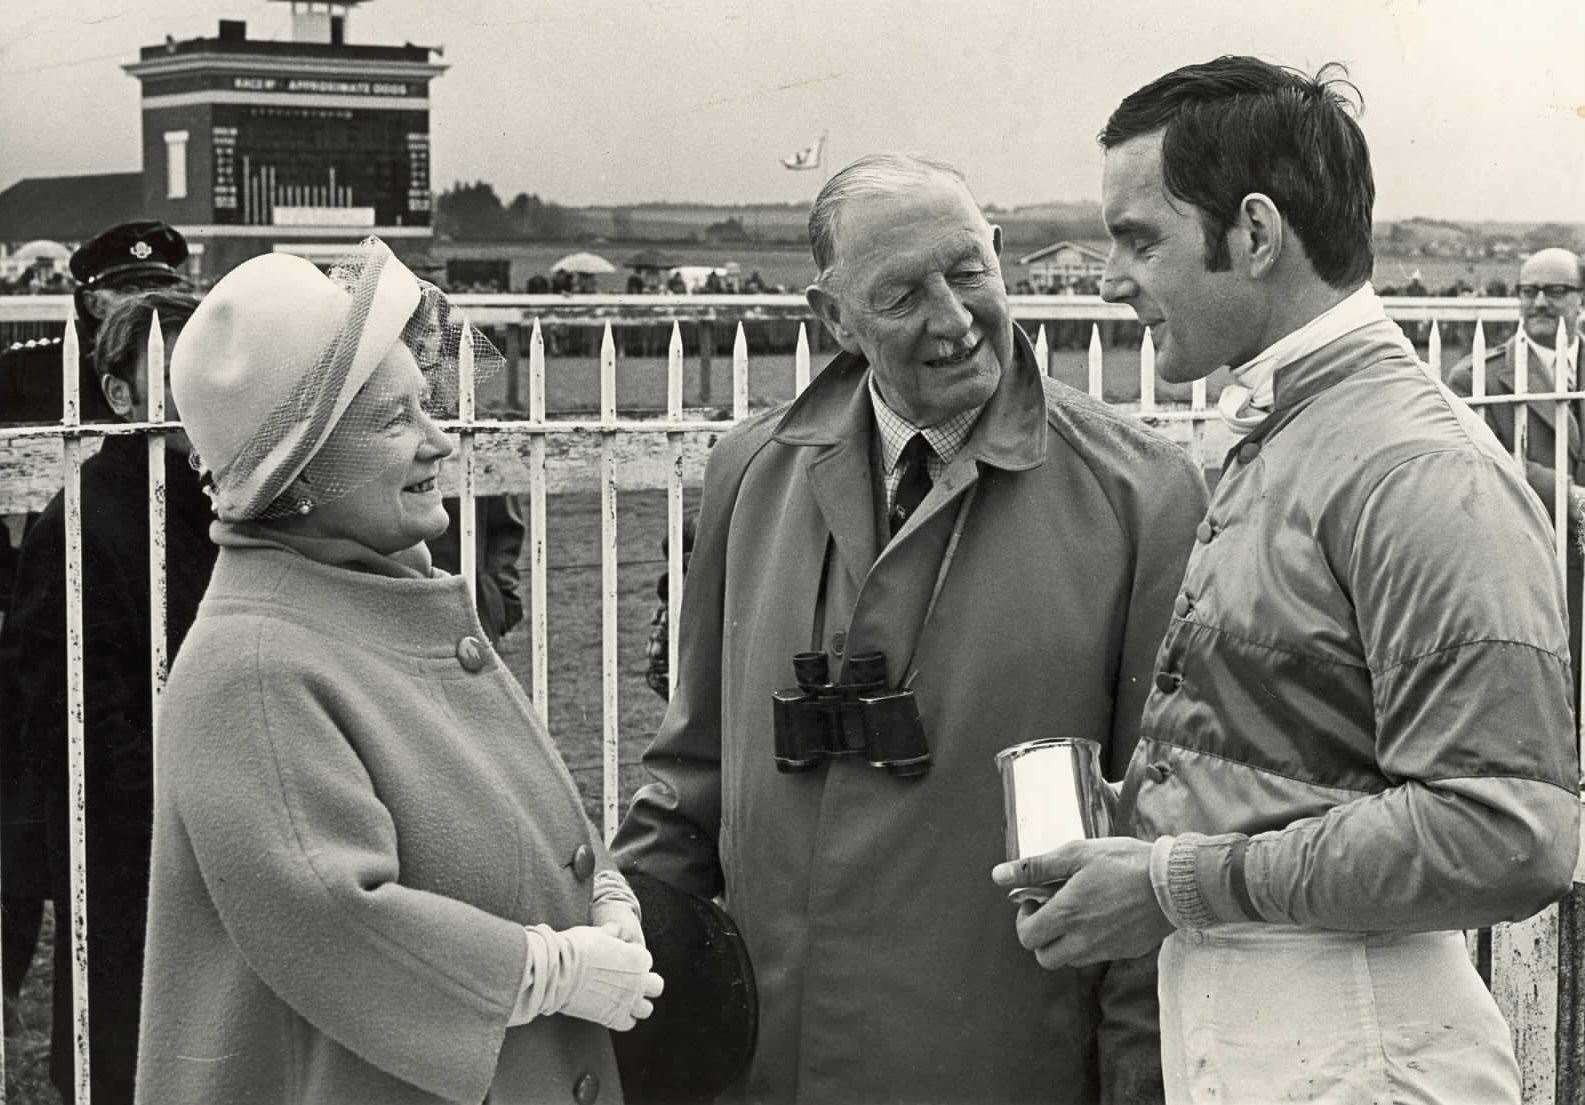 Queen Elizabeth, the Queen Mother, chats to David Mould after presenting him with the trophy for winning the Whitbread Elephant Steeplechase at Folkestone in 1970. Pictured in the centre is Lord Cornwallis